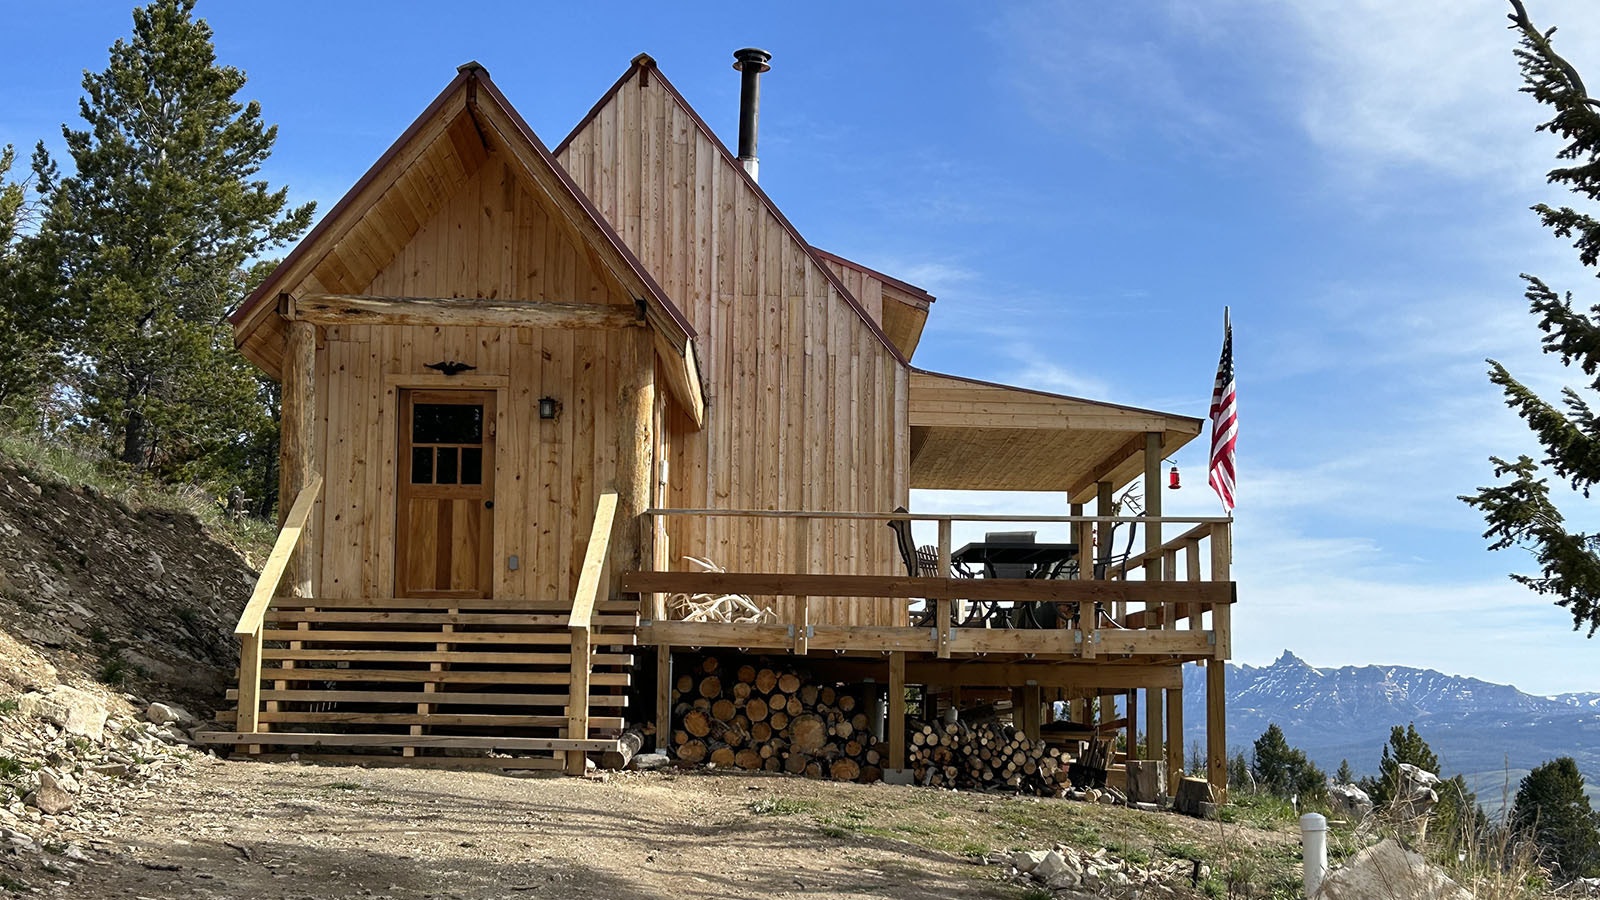 Cody Letteire’s off-grid mountain cabin near Dubois is available for rent through Airbnb and VRBO.